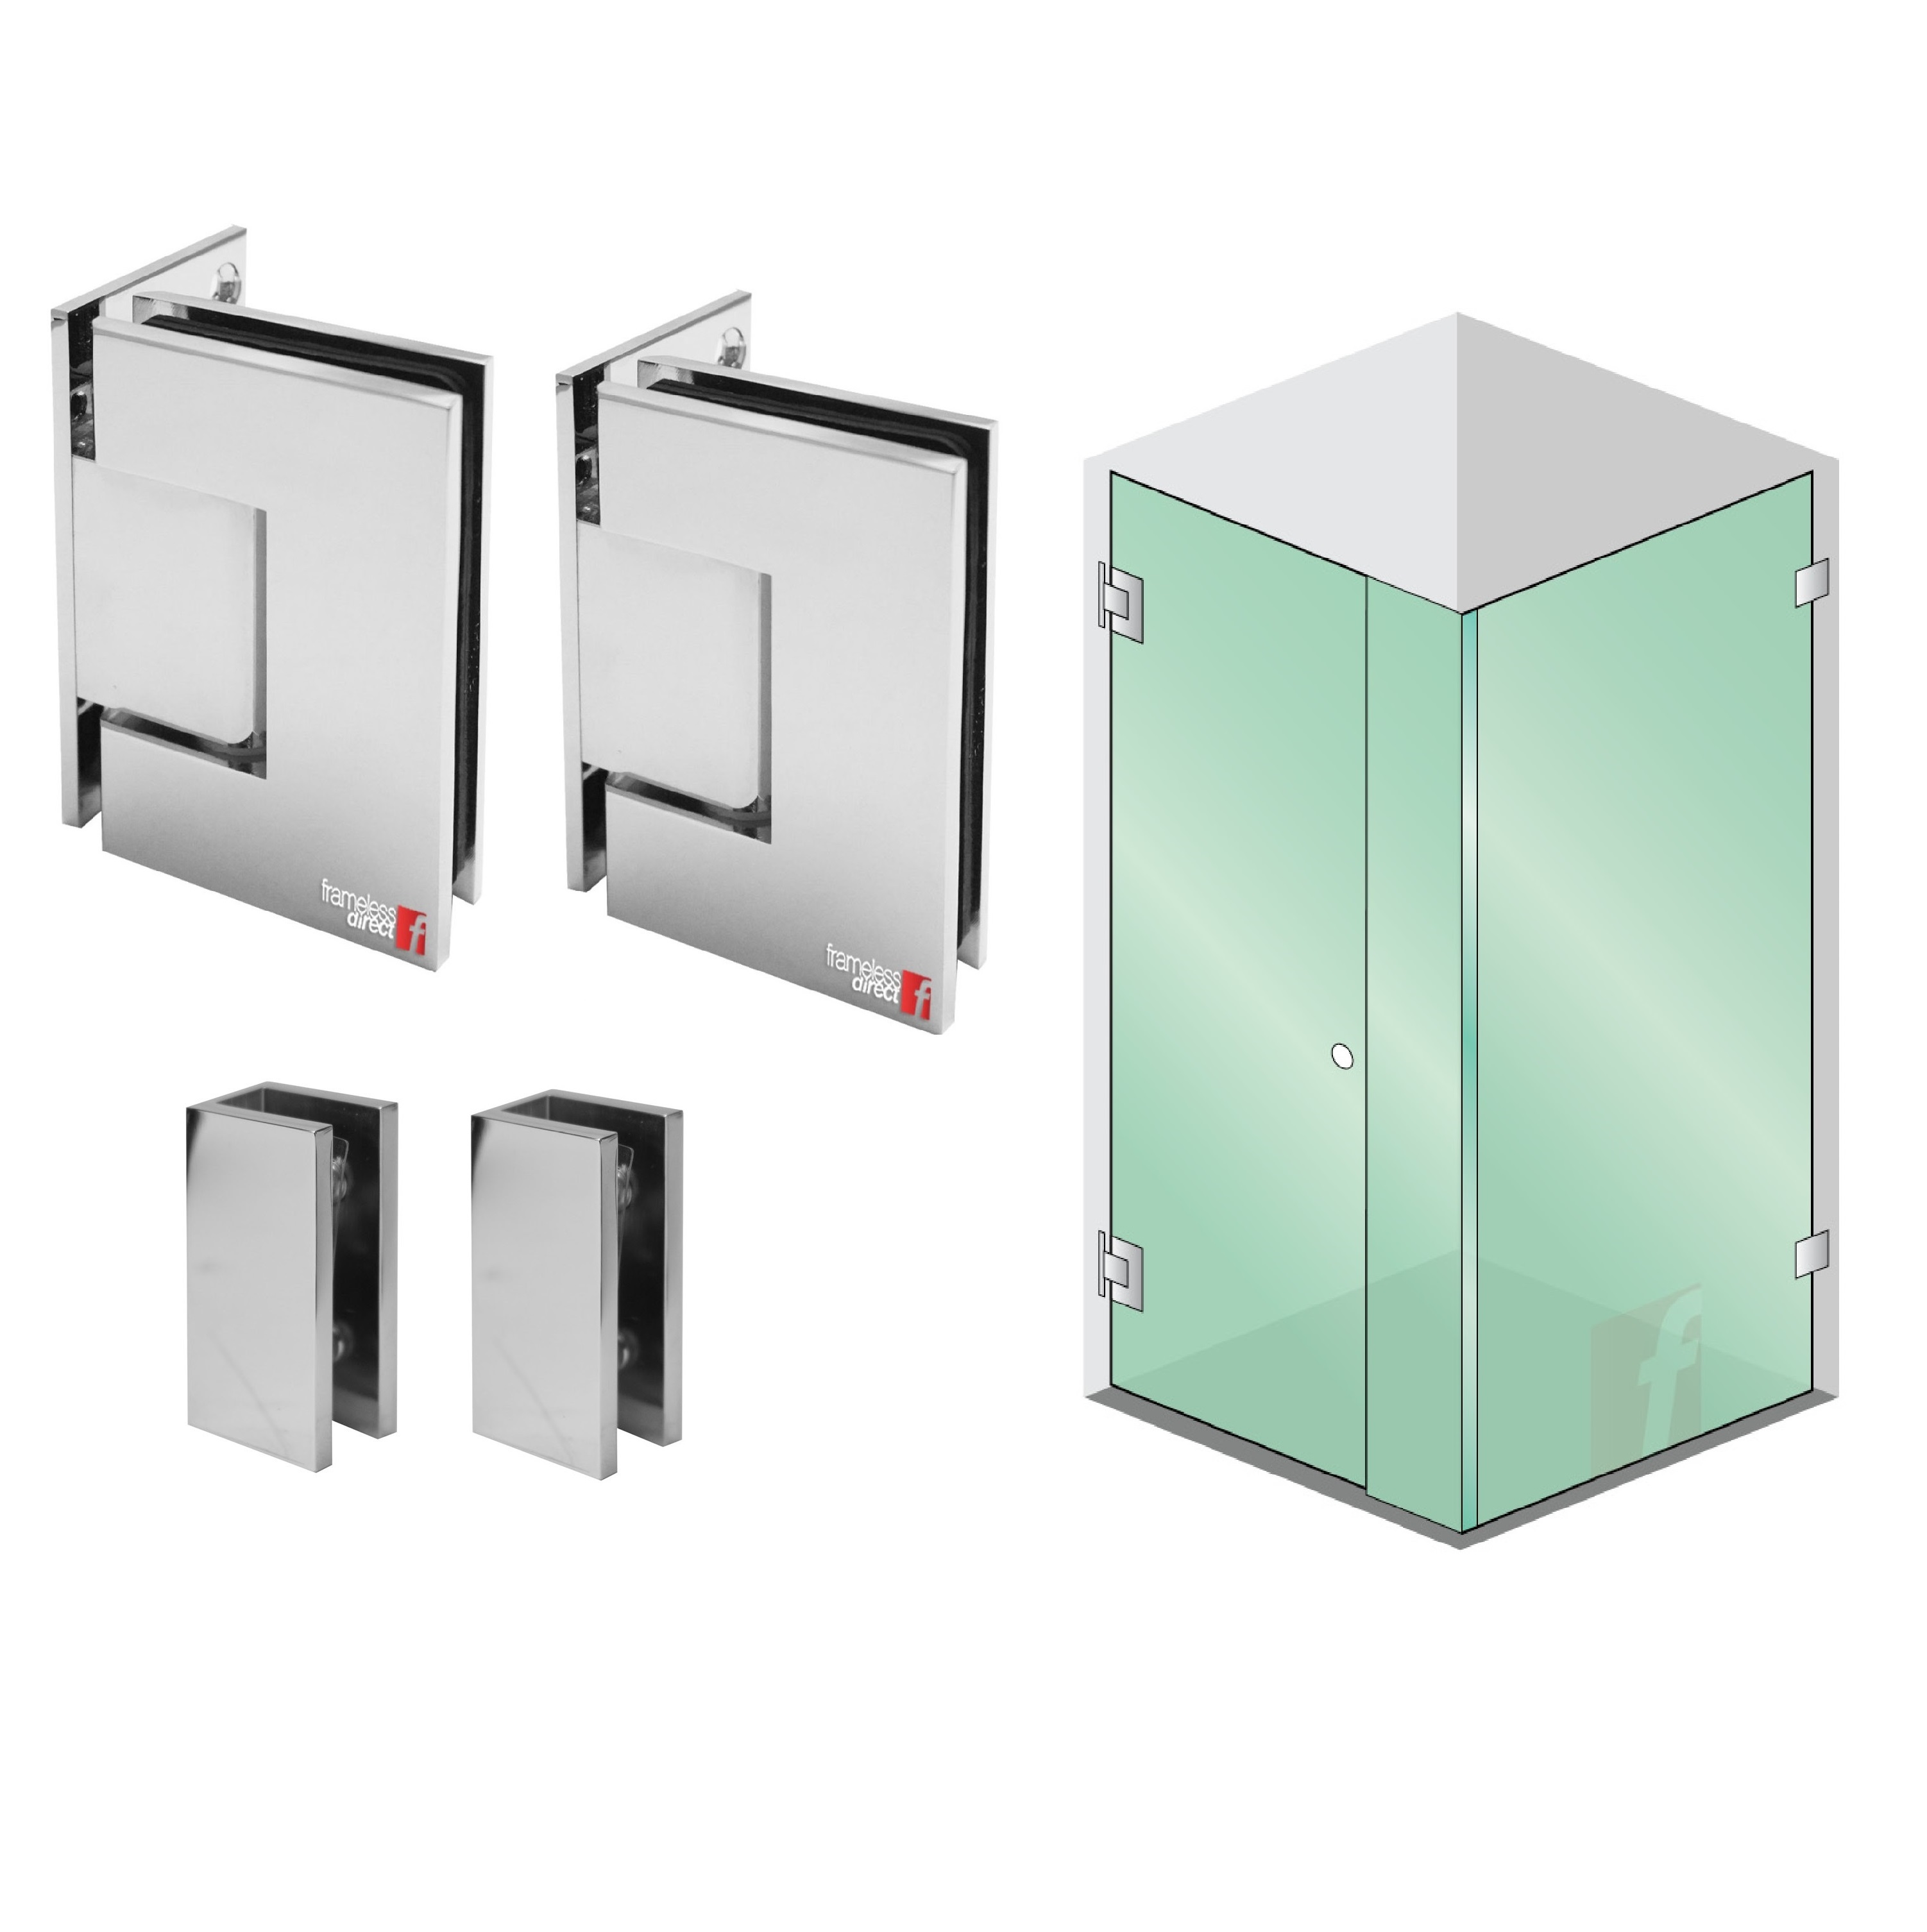 3 PANEL B CORNER SCREEN WITH CHROME PLATED HARDWARE